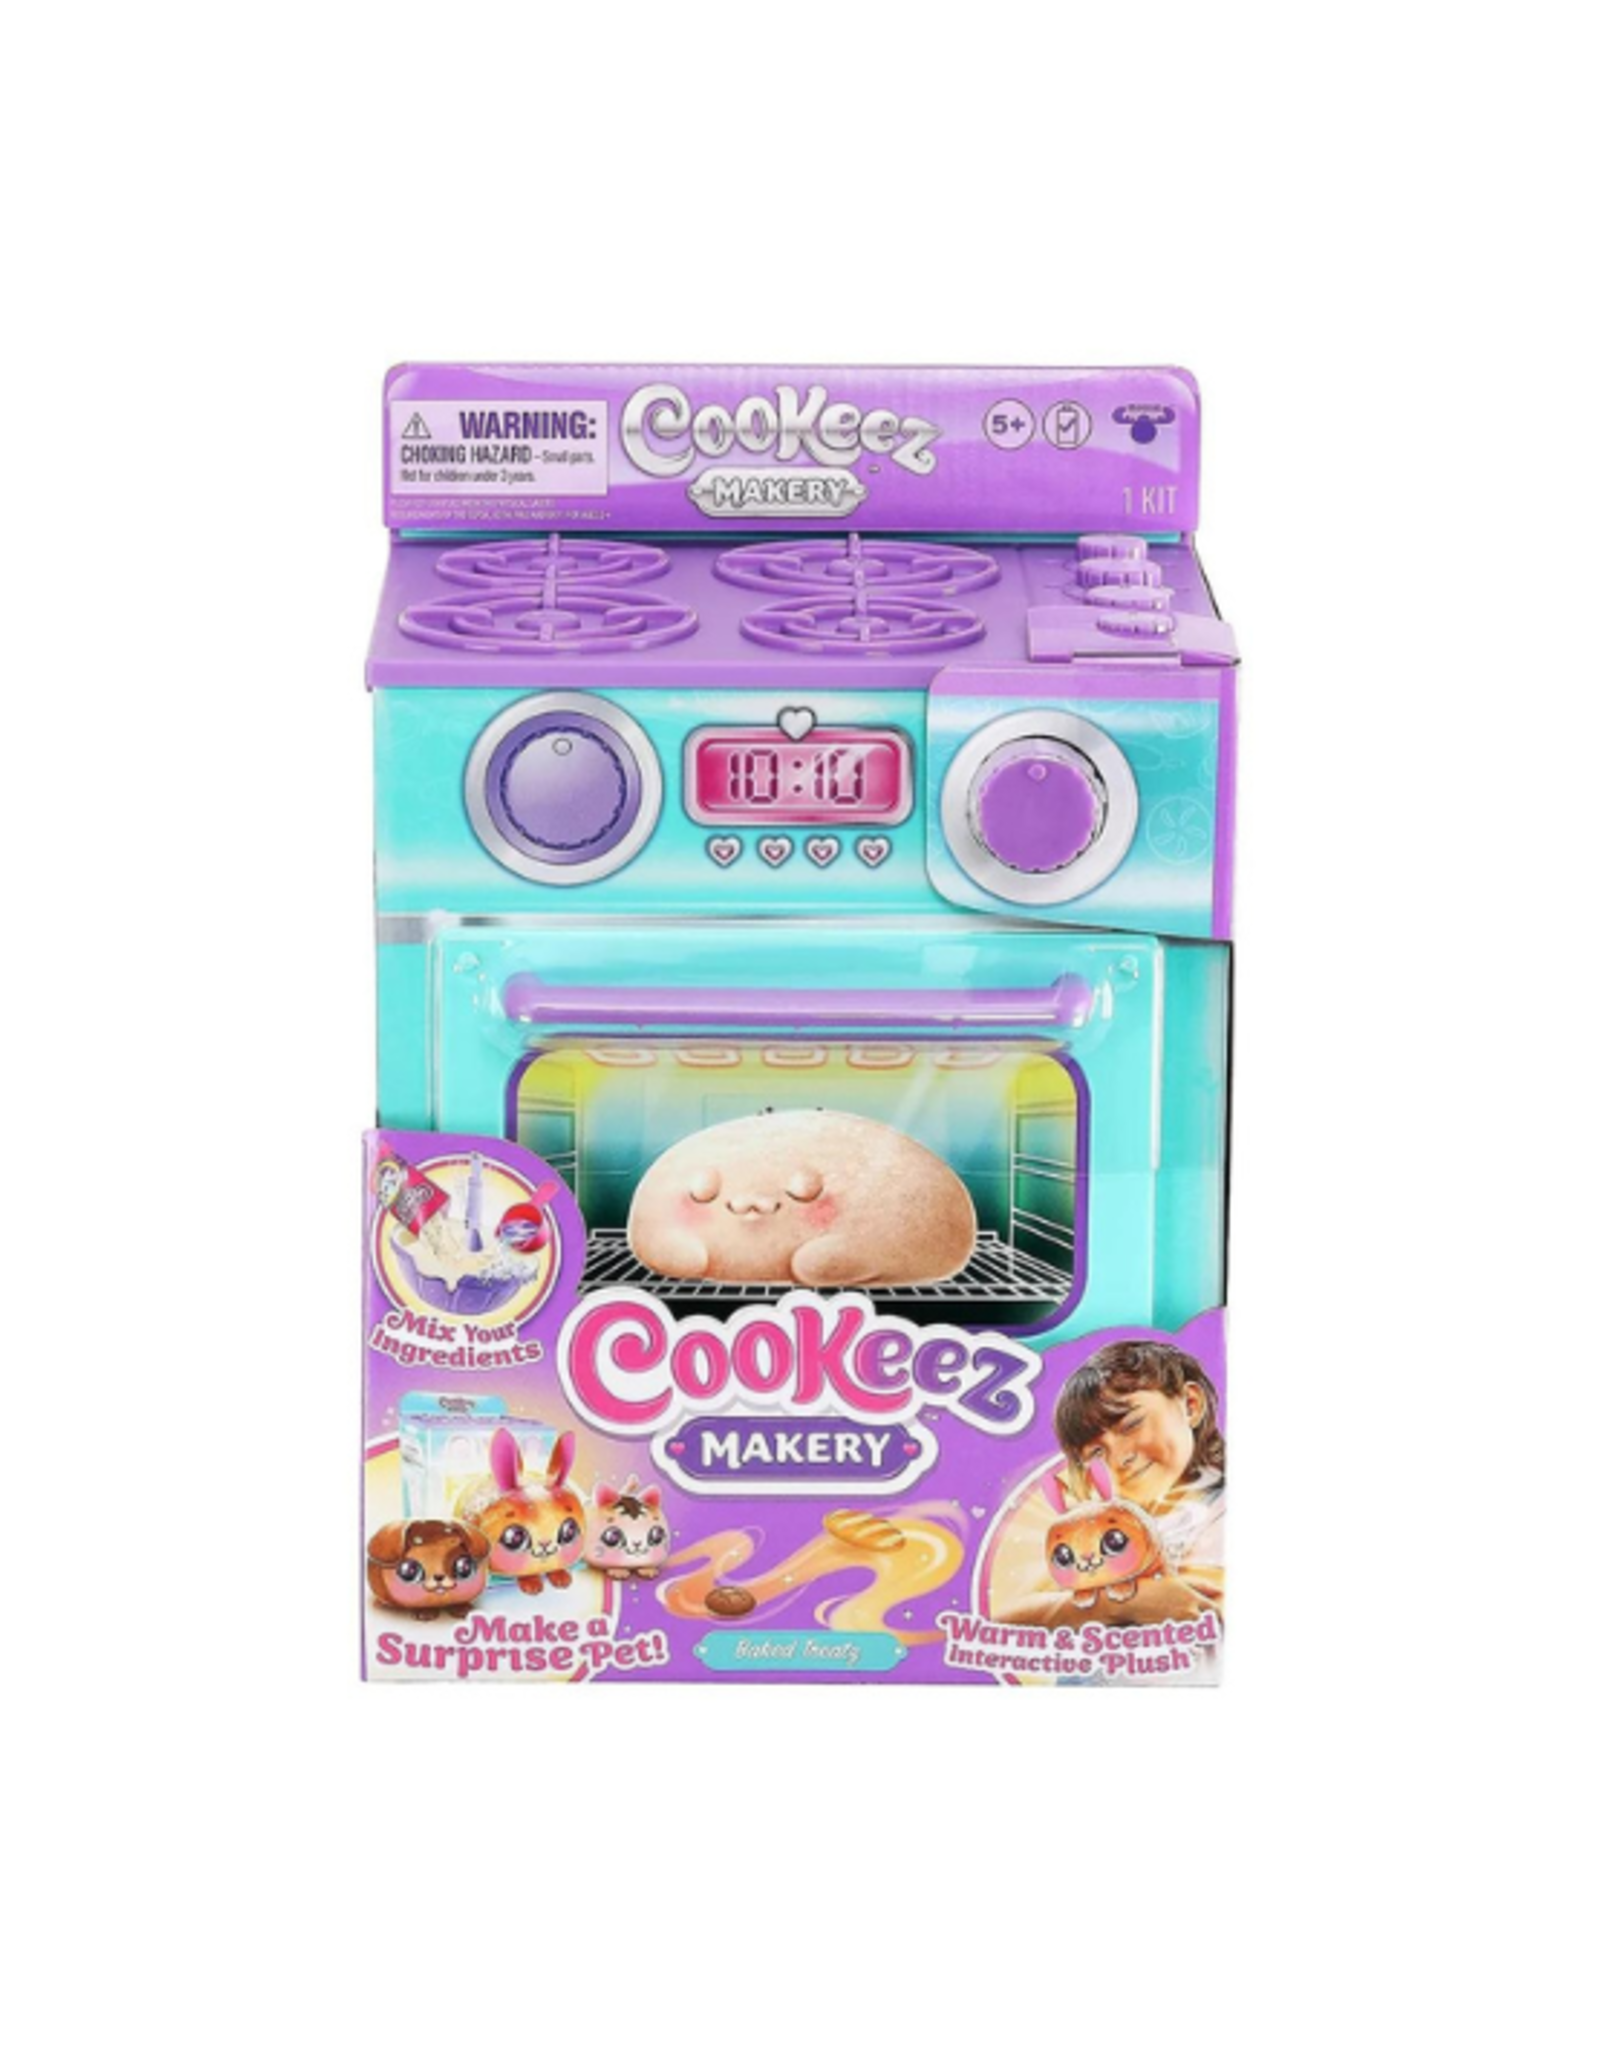 Moose Toys Cookeez - Makery Oven Playset Bread